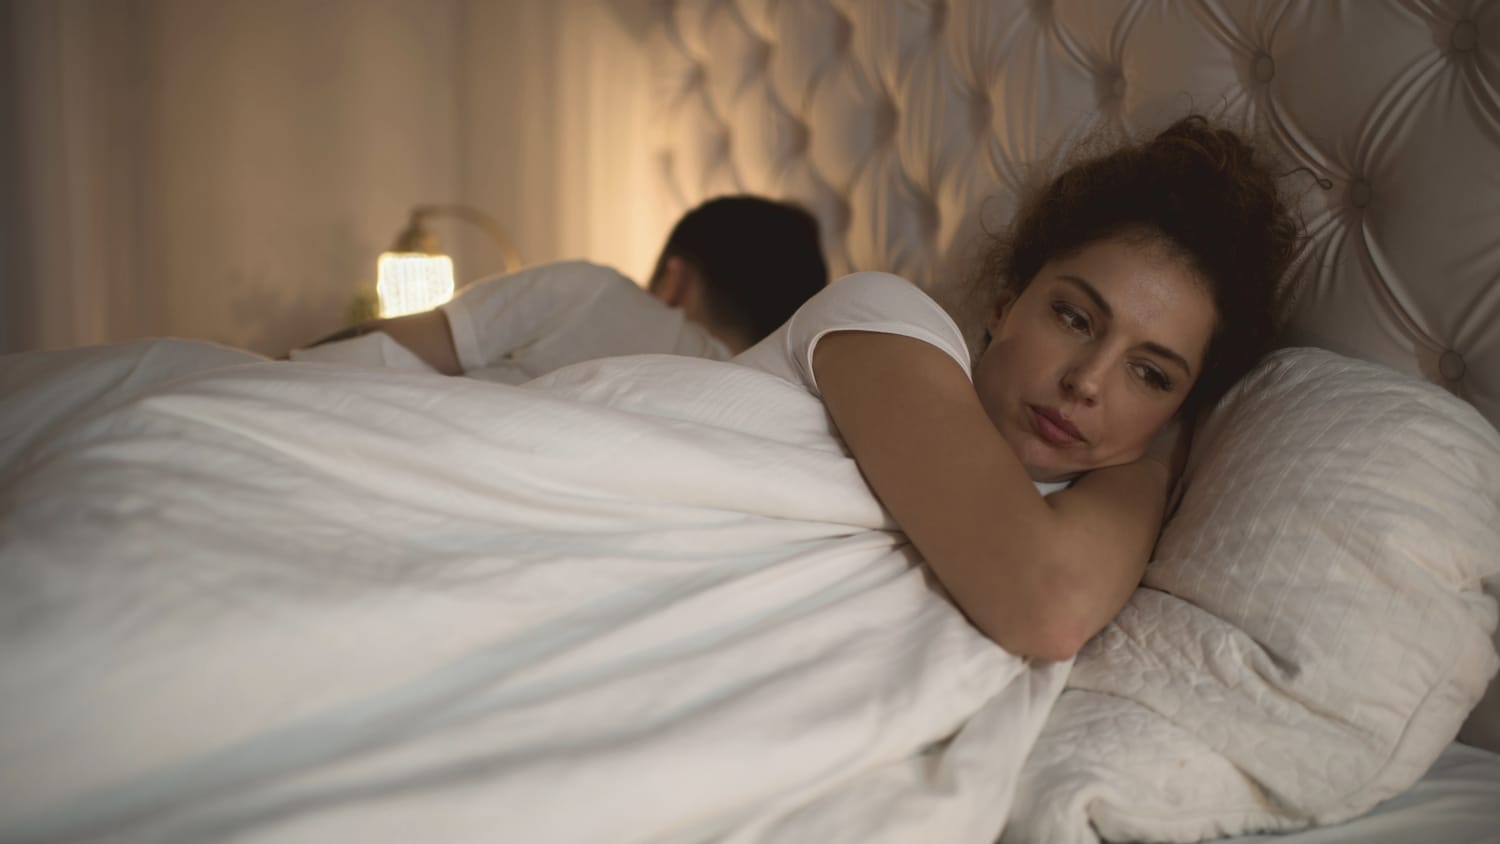 Woman lying in bed awake with her partner next to her asleep.